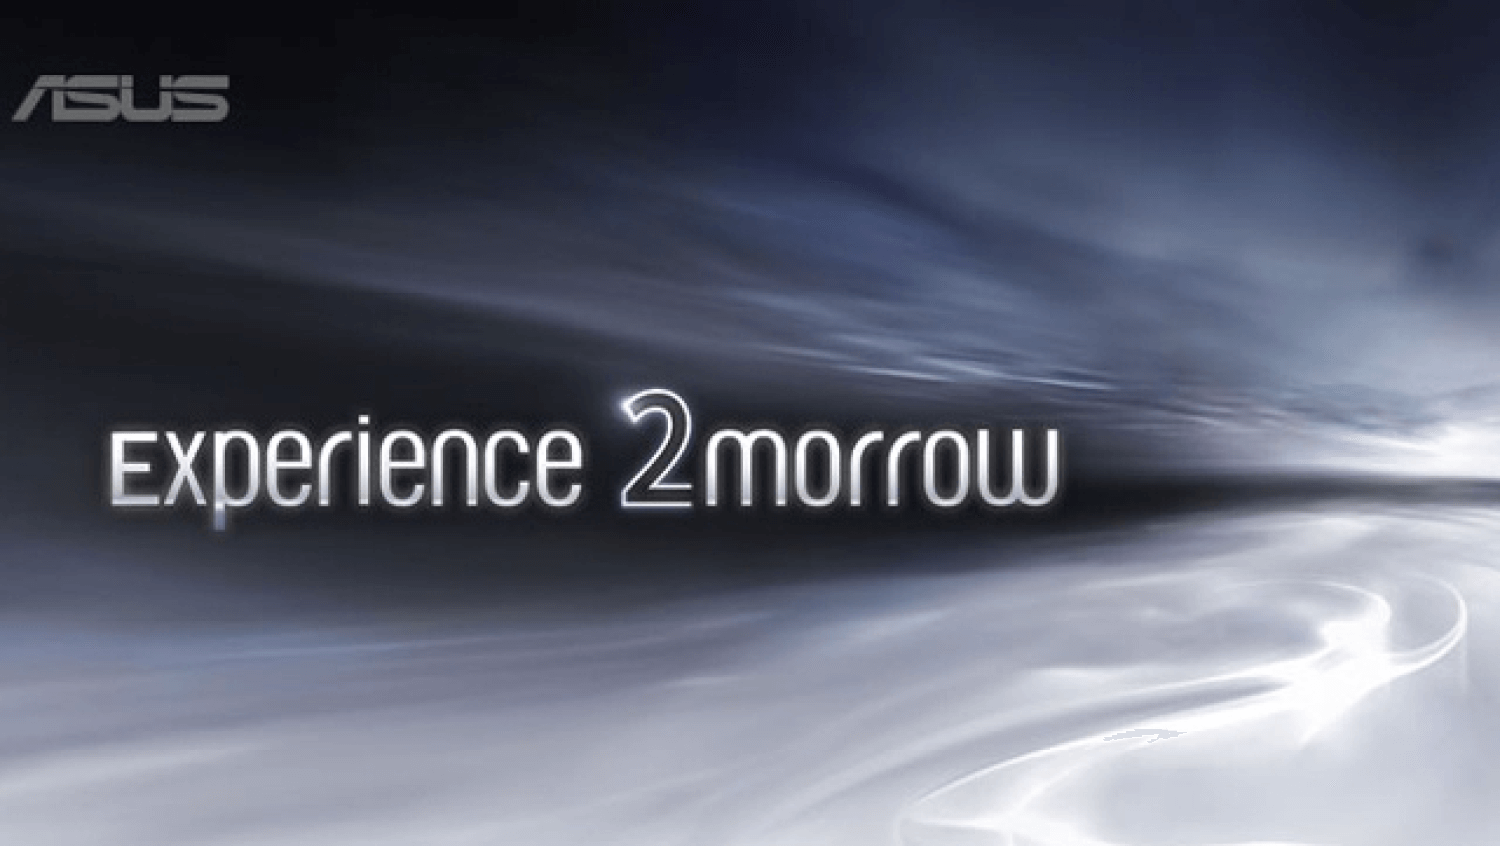 Asus experience 2morrow